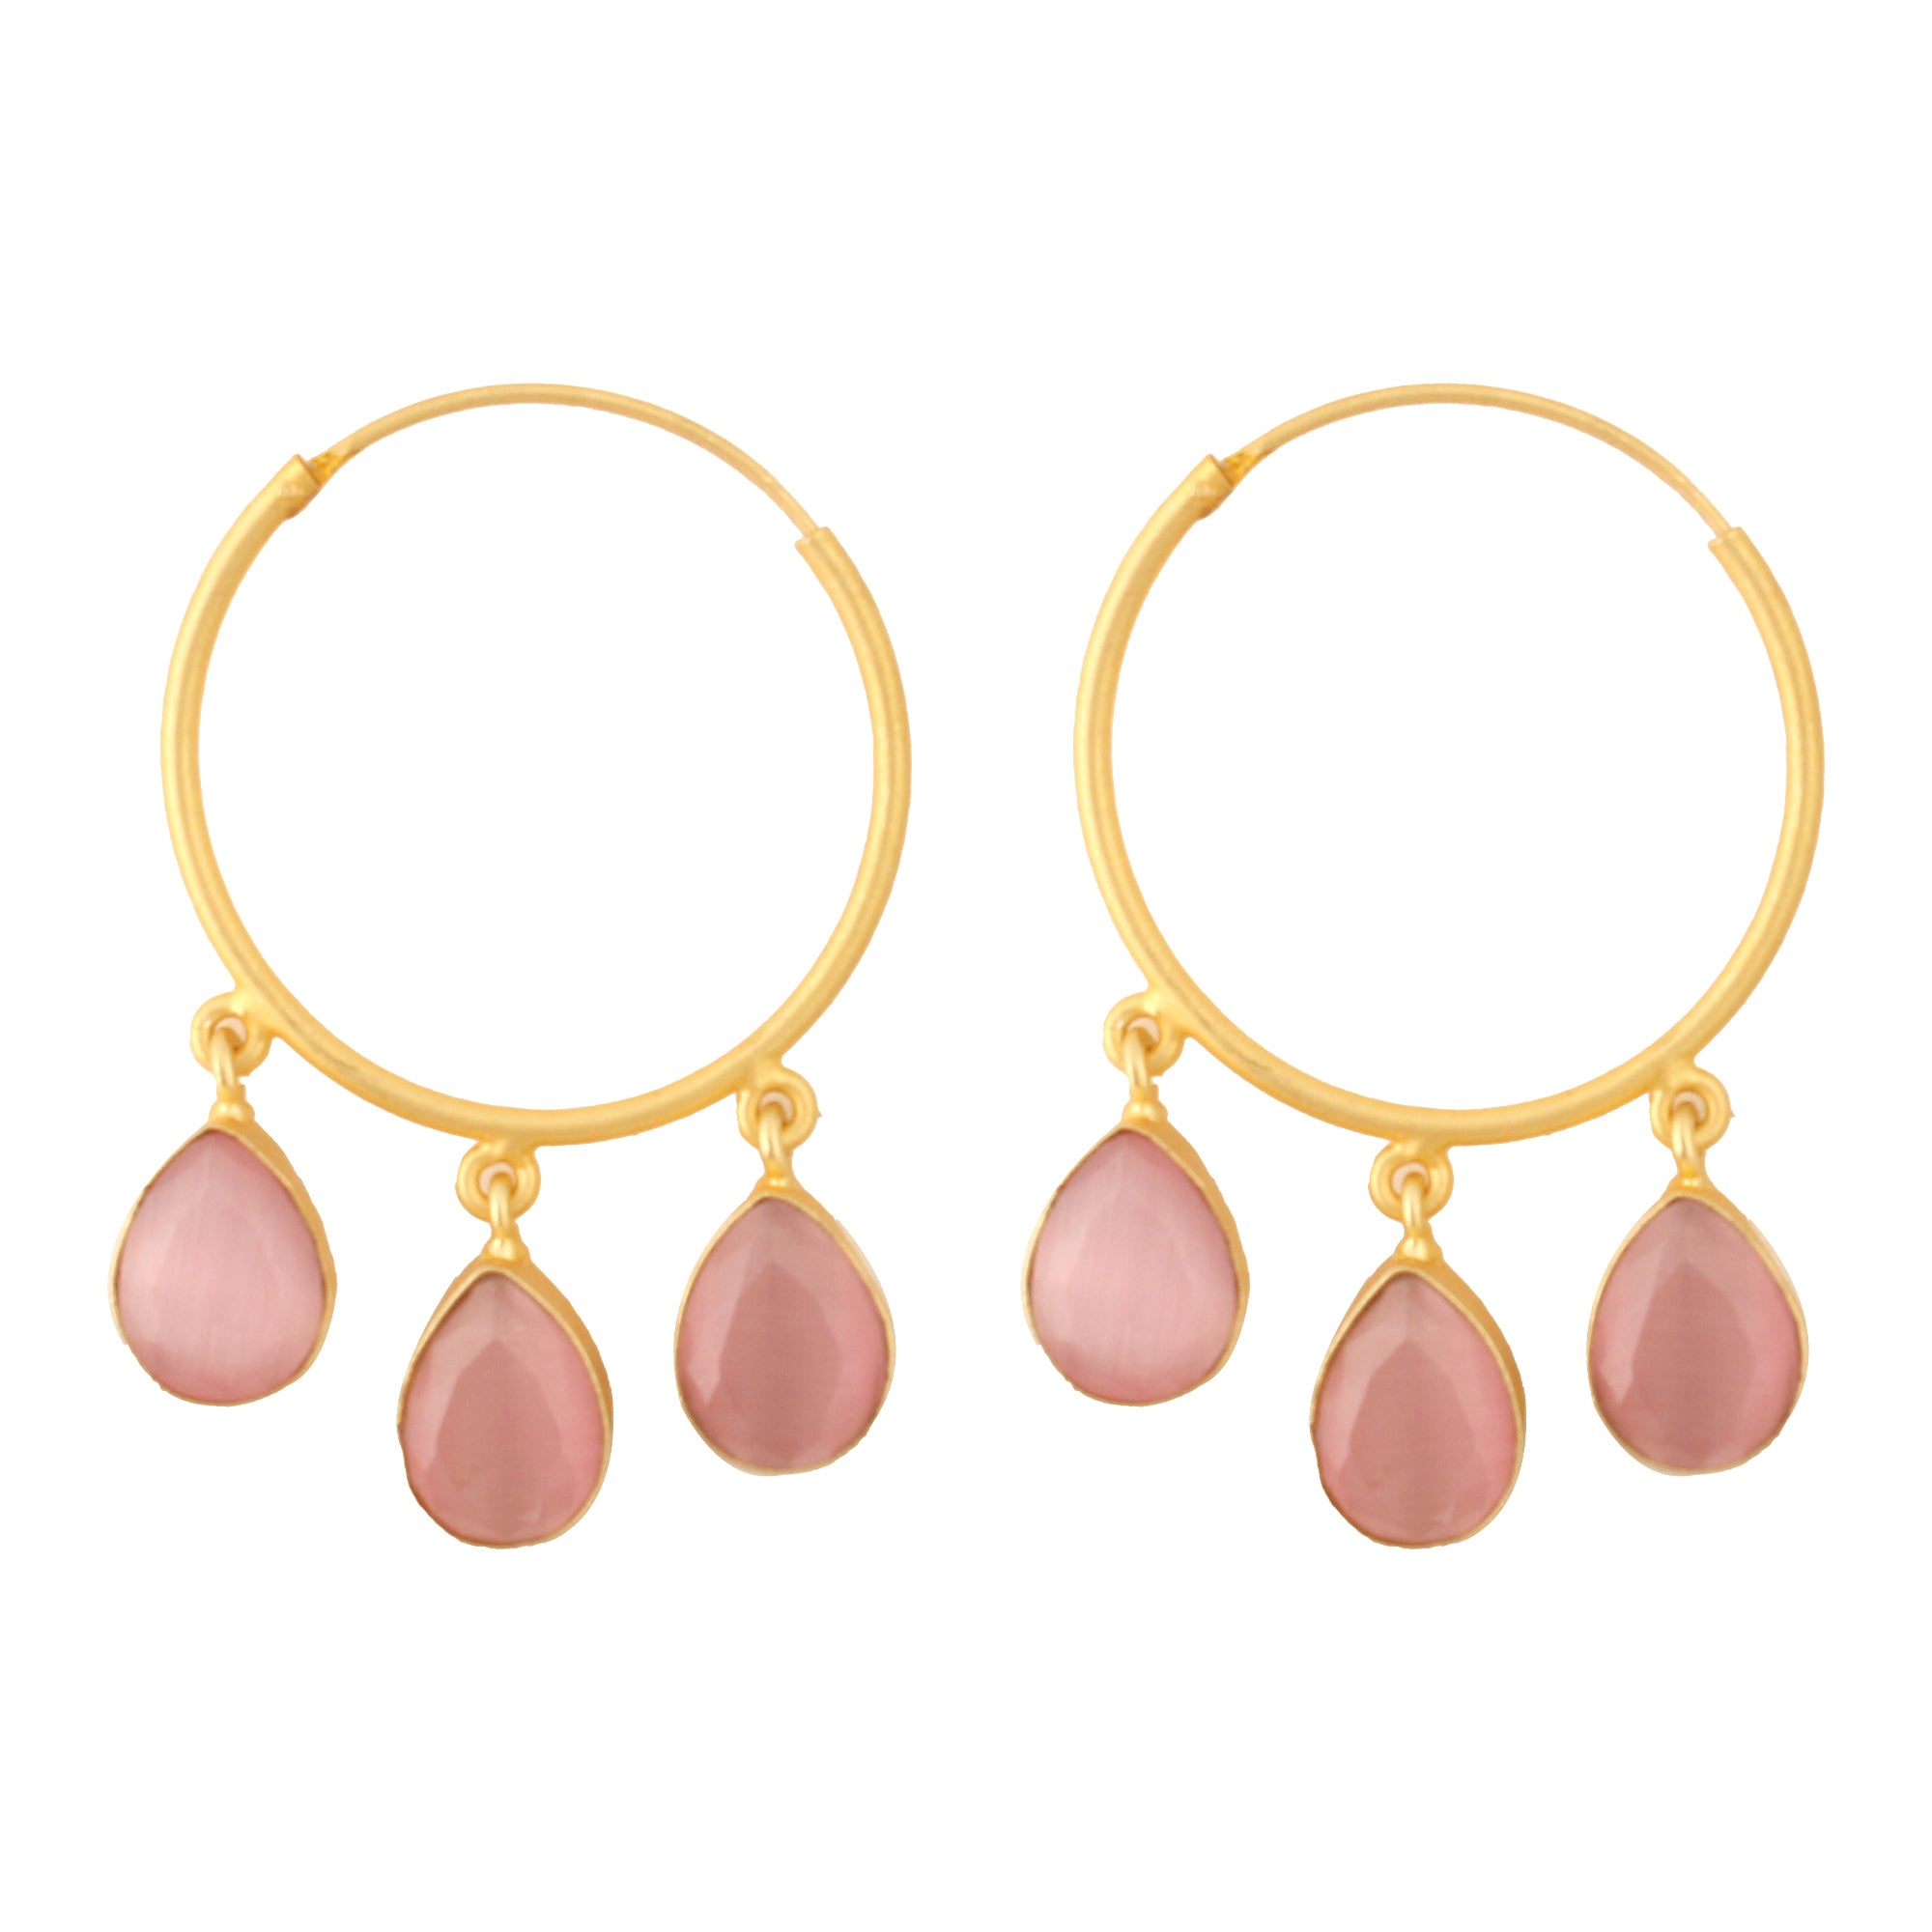 Gold Plated Handcrafted Brass Hoop Earrings